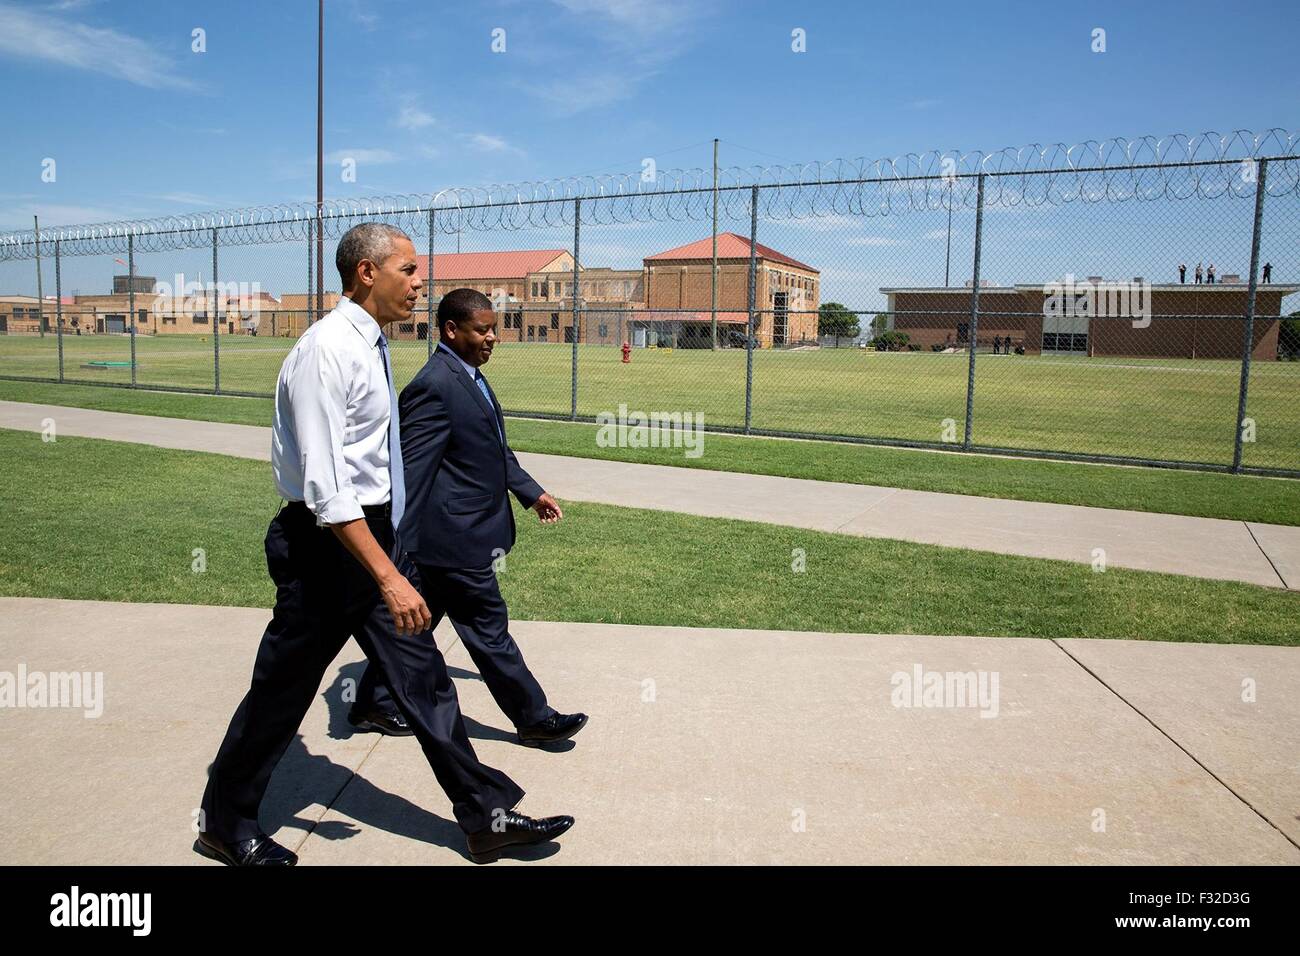 U.S. President Barack Obama tours the prison grounds or El Reno Federal Correctional Institution with Director Charles Samuels July 16, 2015 in El Reno, Oklahoma. Obama's trip was the first visit by a sitting President to a federal prison. Stock Photo